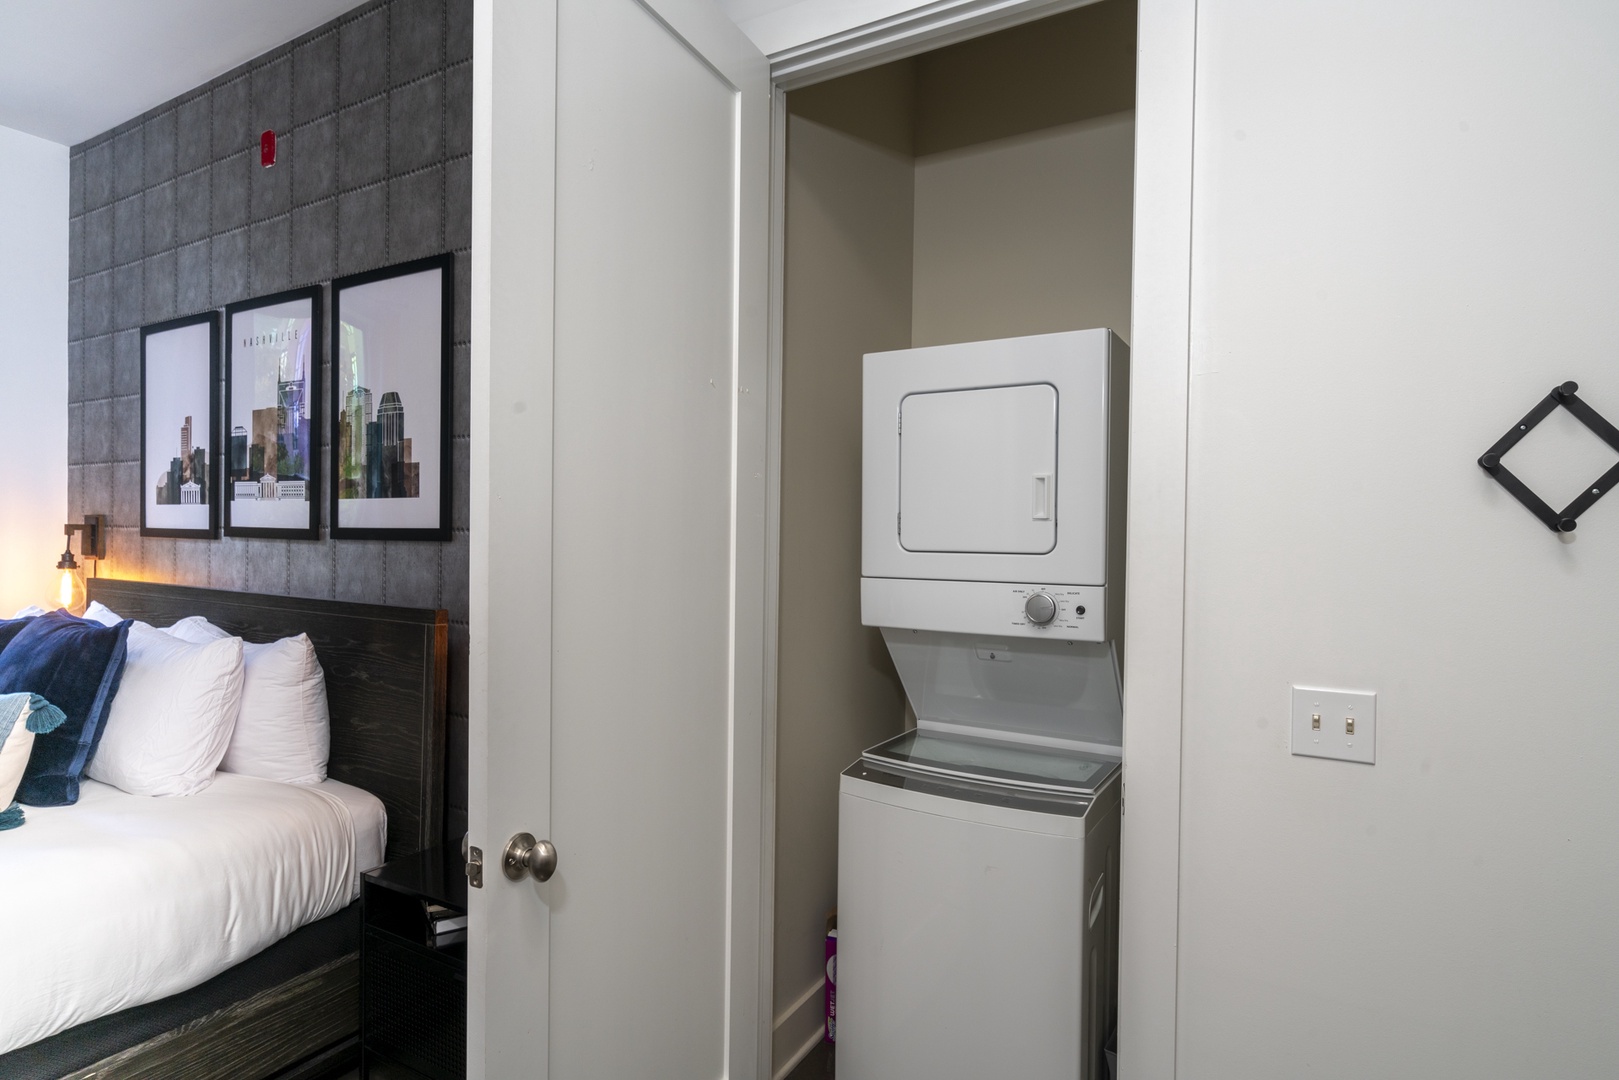 Private laundry is available for your stay, tucked away by the bedroom